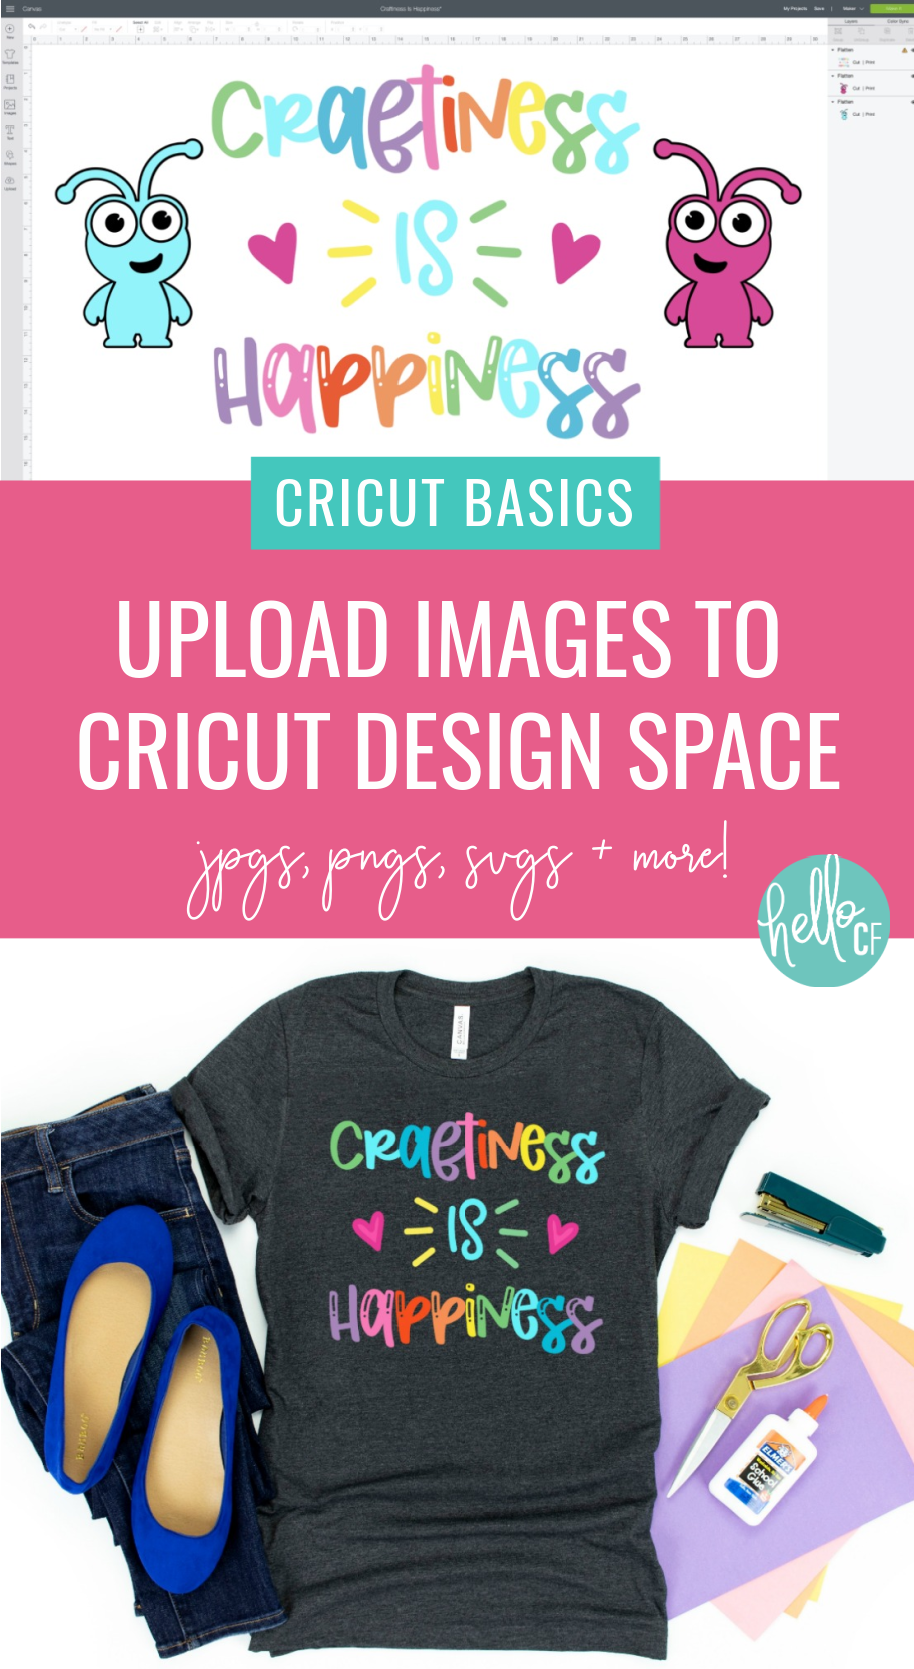 Are you a Cricut Beginner? Check out Hello Creative Family's Cricut Basics series! This free lesson will teach you how to upload cut files to Cricut Design Space including jpgs, svg files, pngs and more! Learn to use your Cricut like a pro! #CricutCreated #CricutMade #Cricut #CricutTutorial #CricutDesignSpace #Crafting #Tutorial